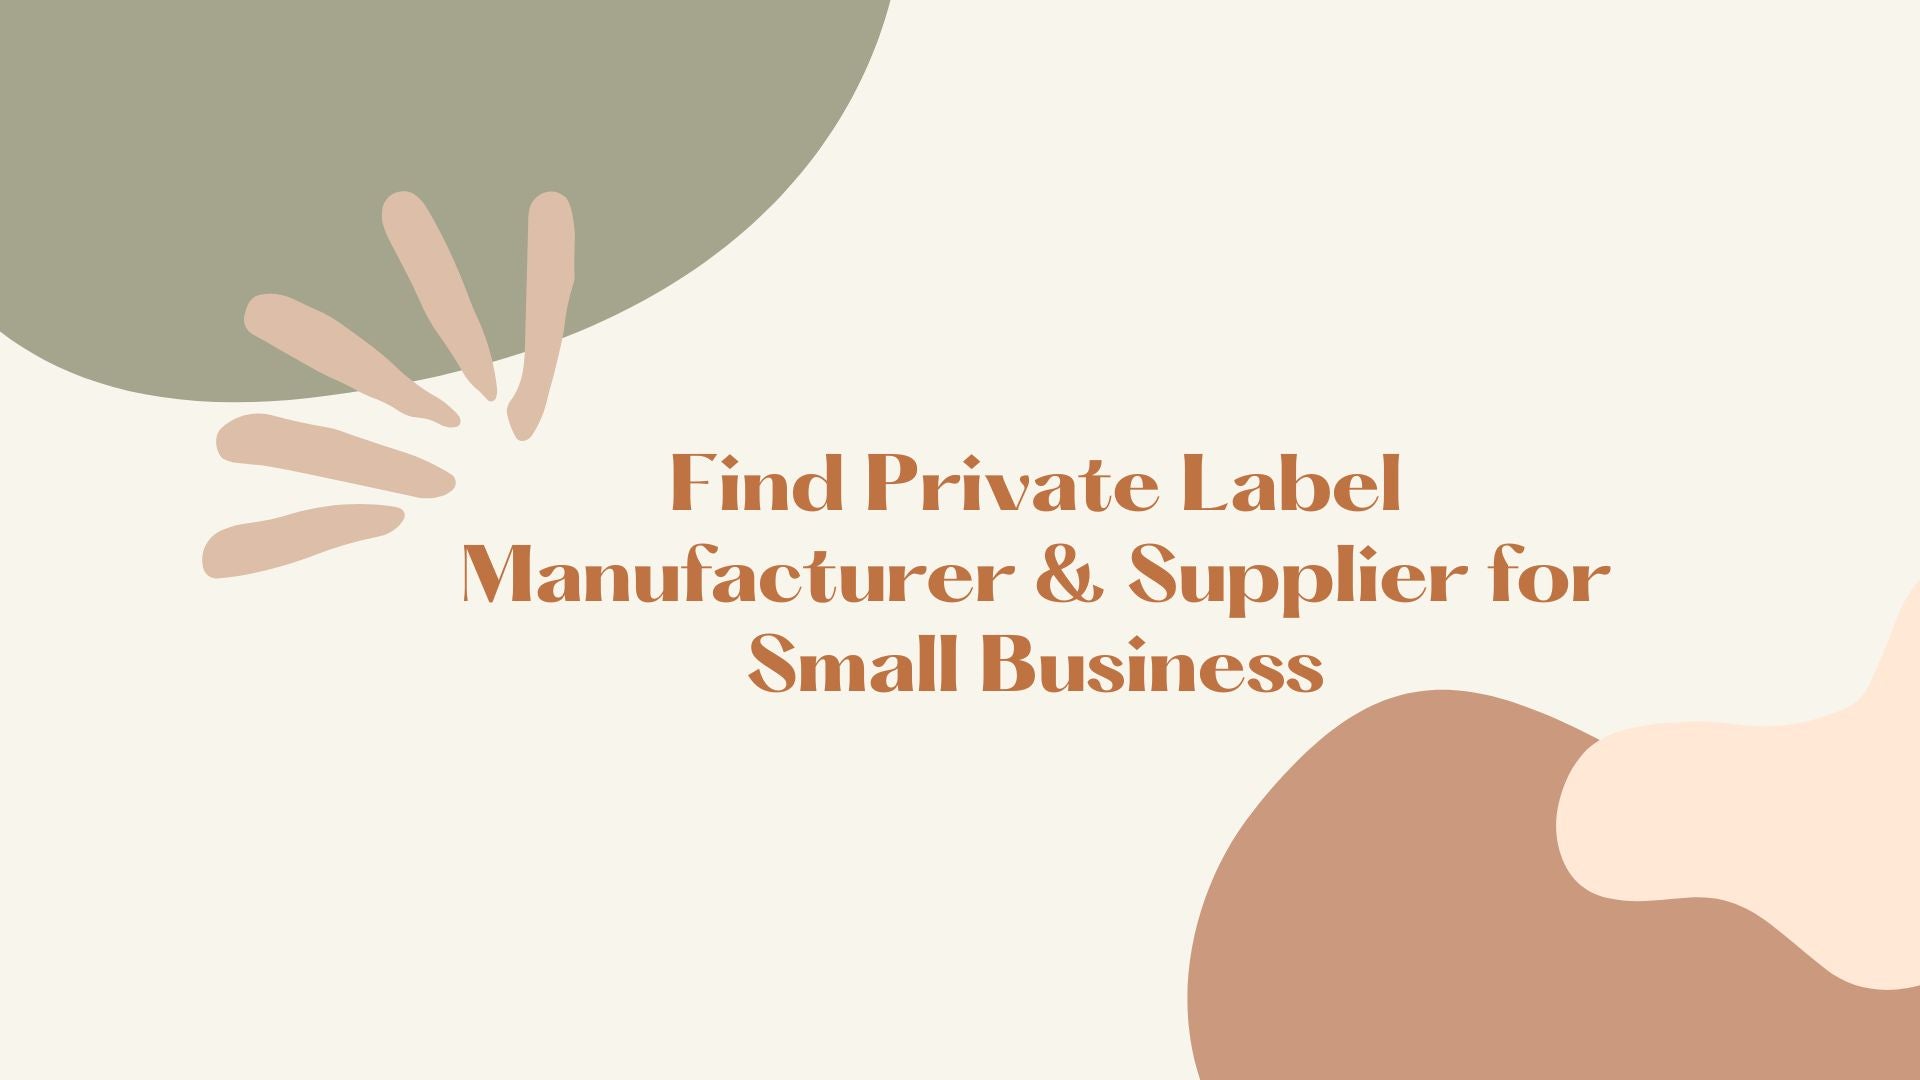 Find Private Label Manufacturer & Supplier for Small Business